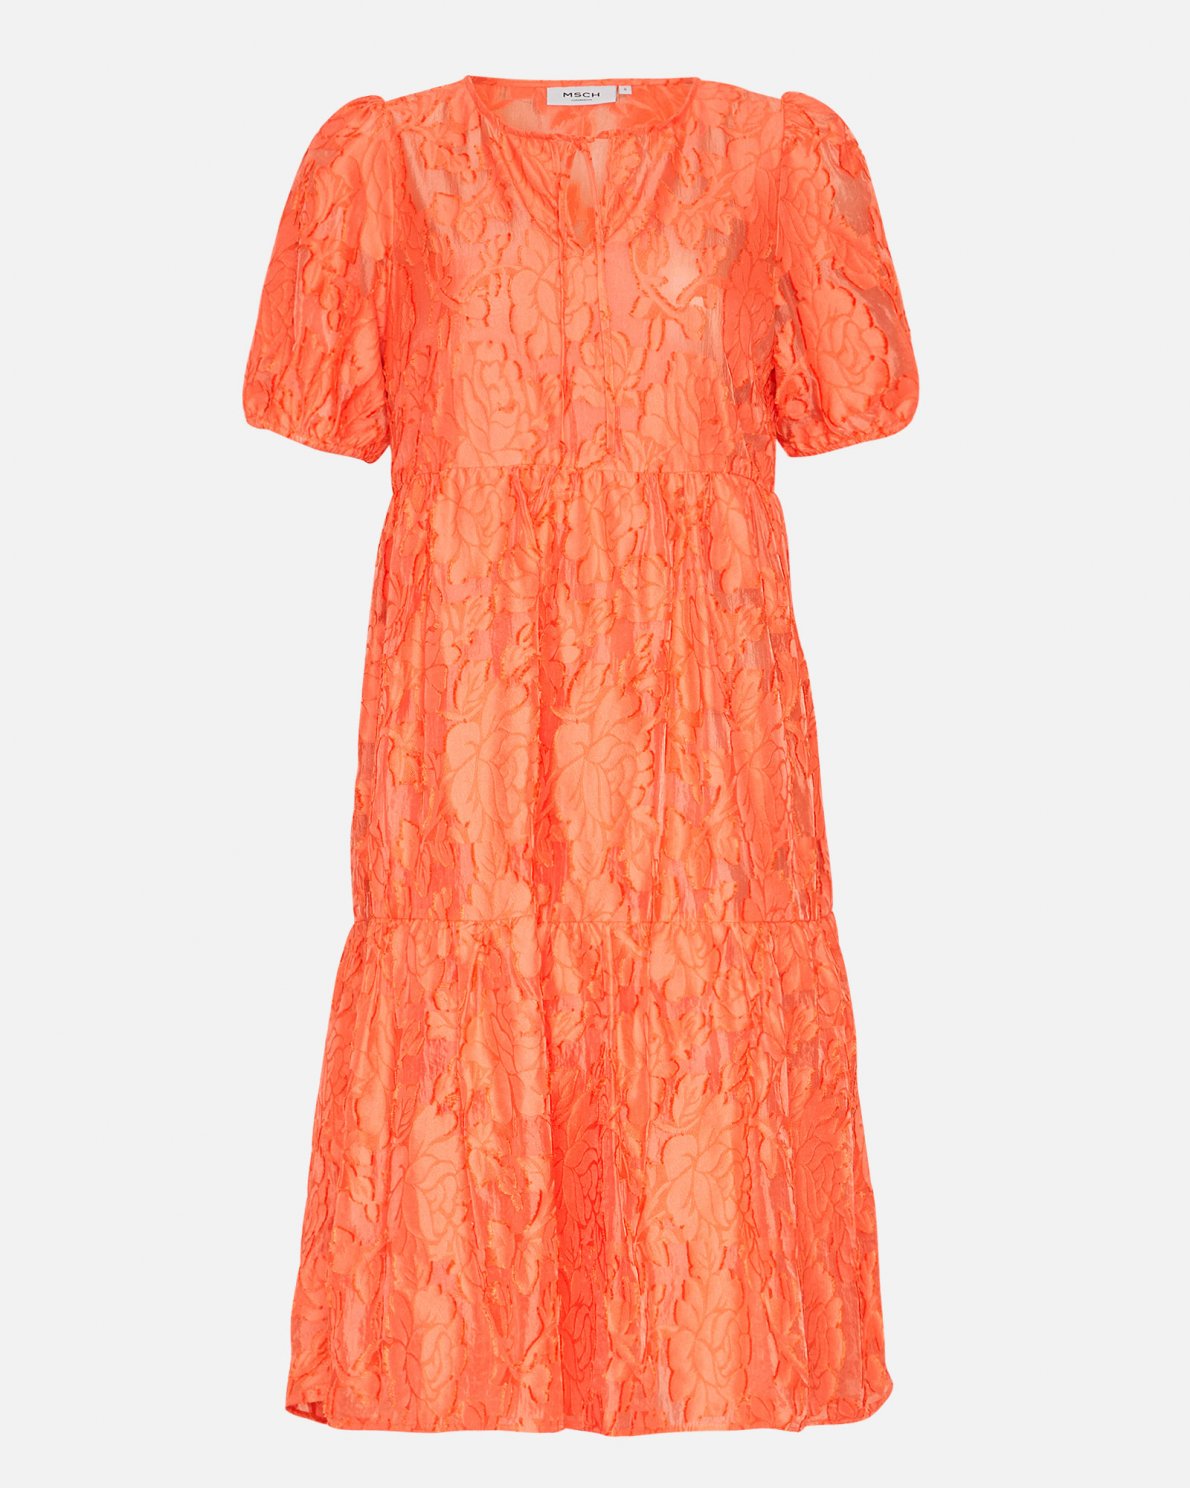 Pave SS Dress Persimmon